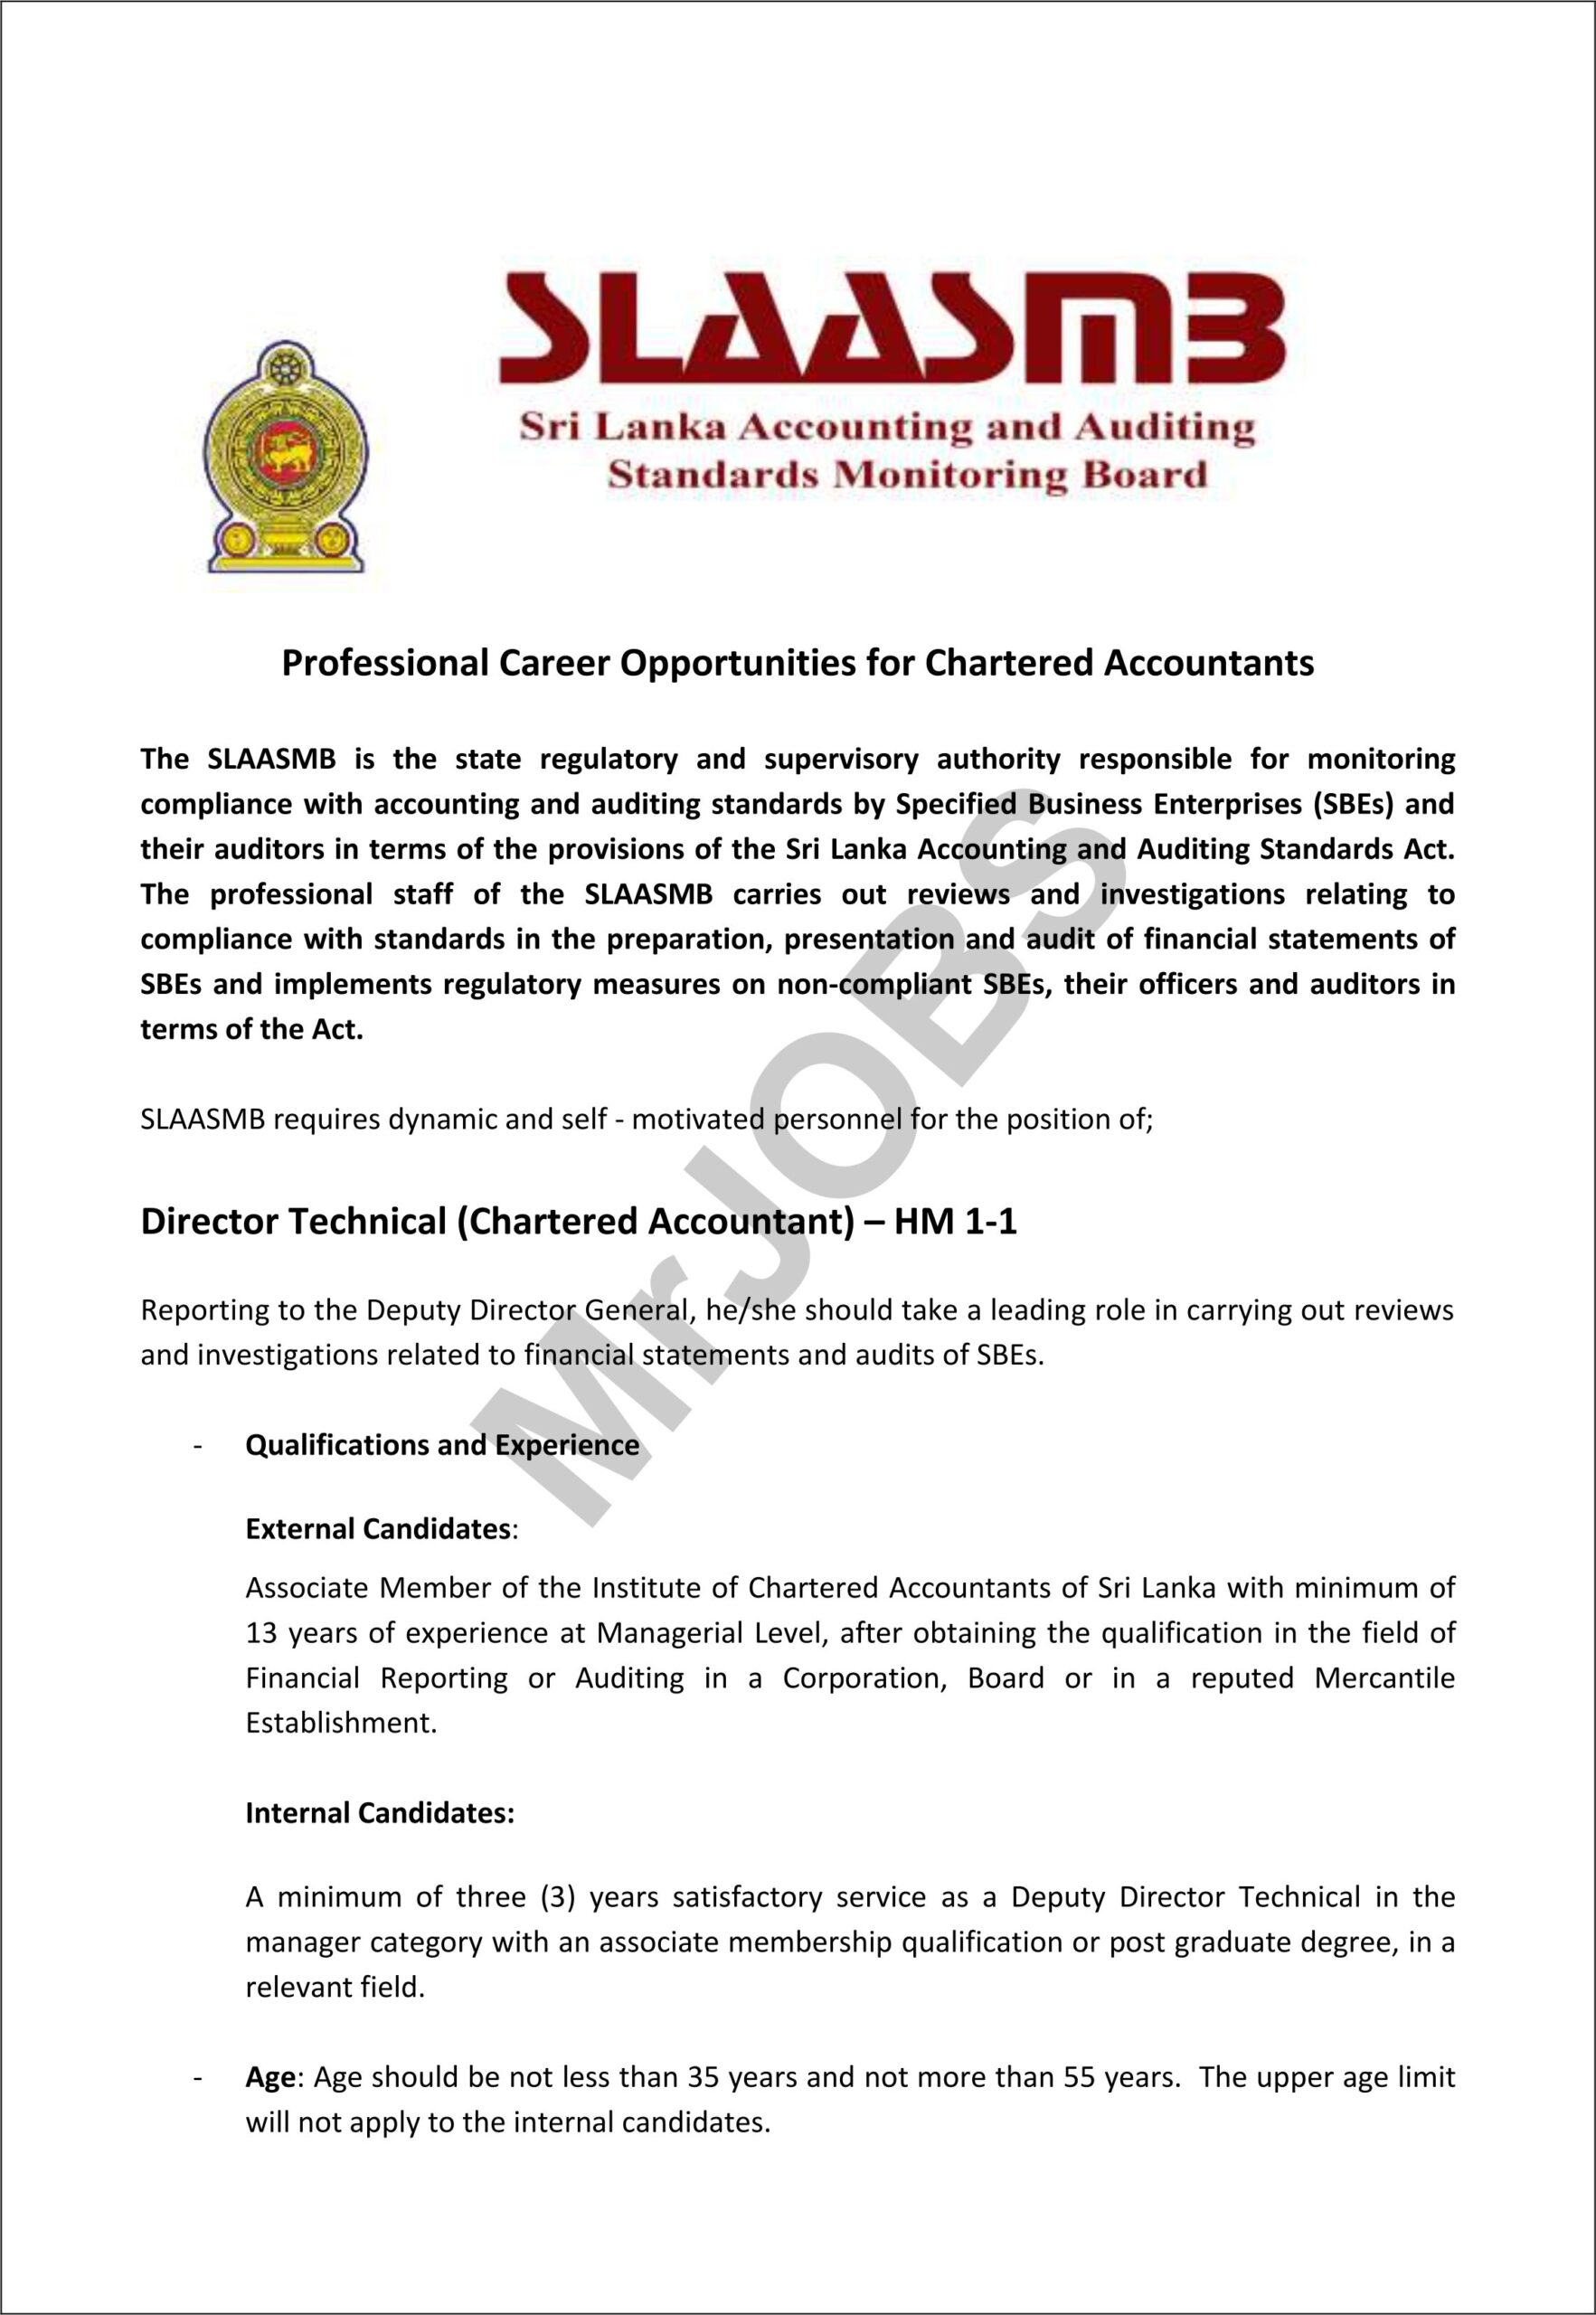 Chartered Accountant as Director (Technical) - SLAASMB